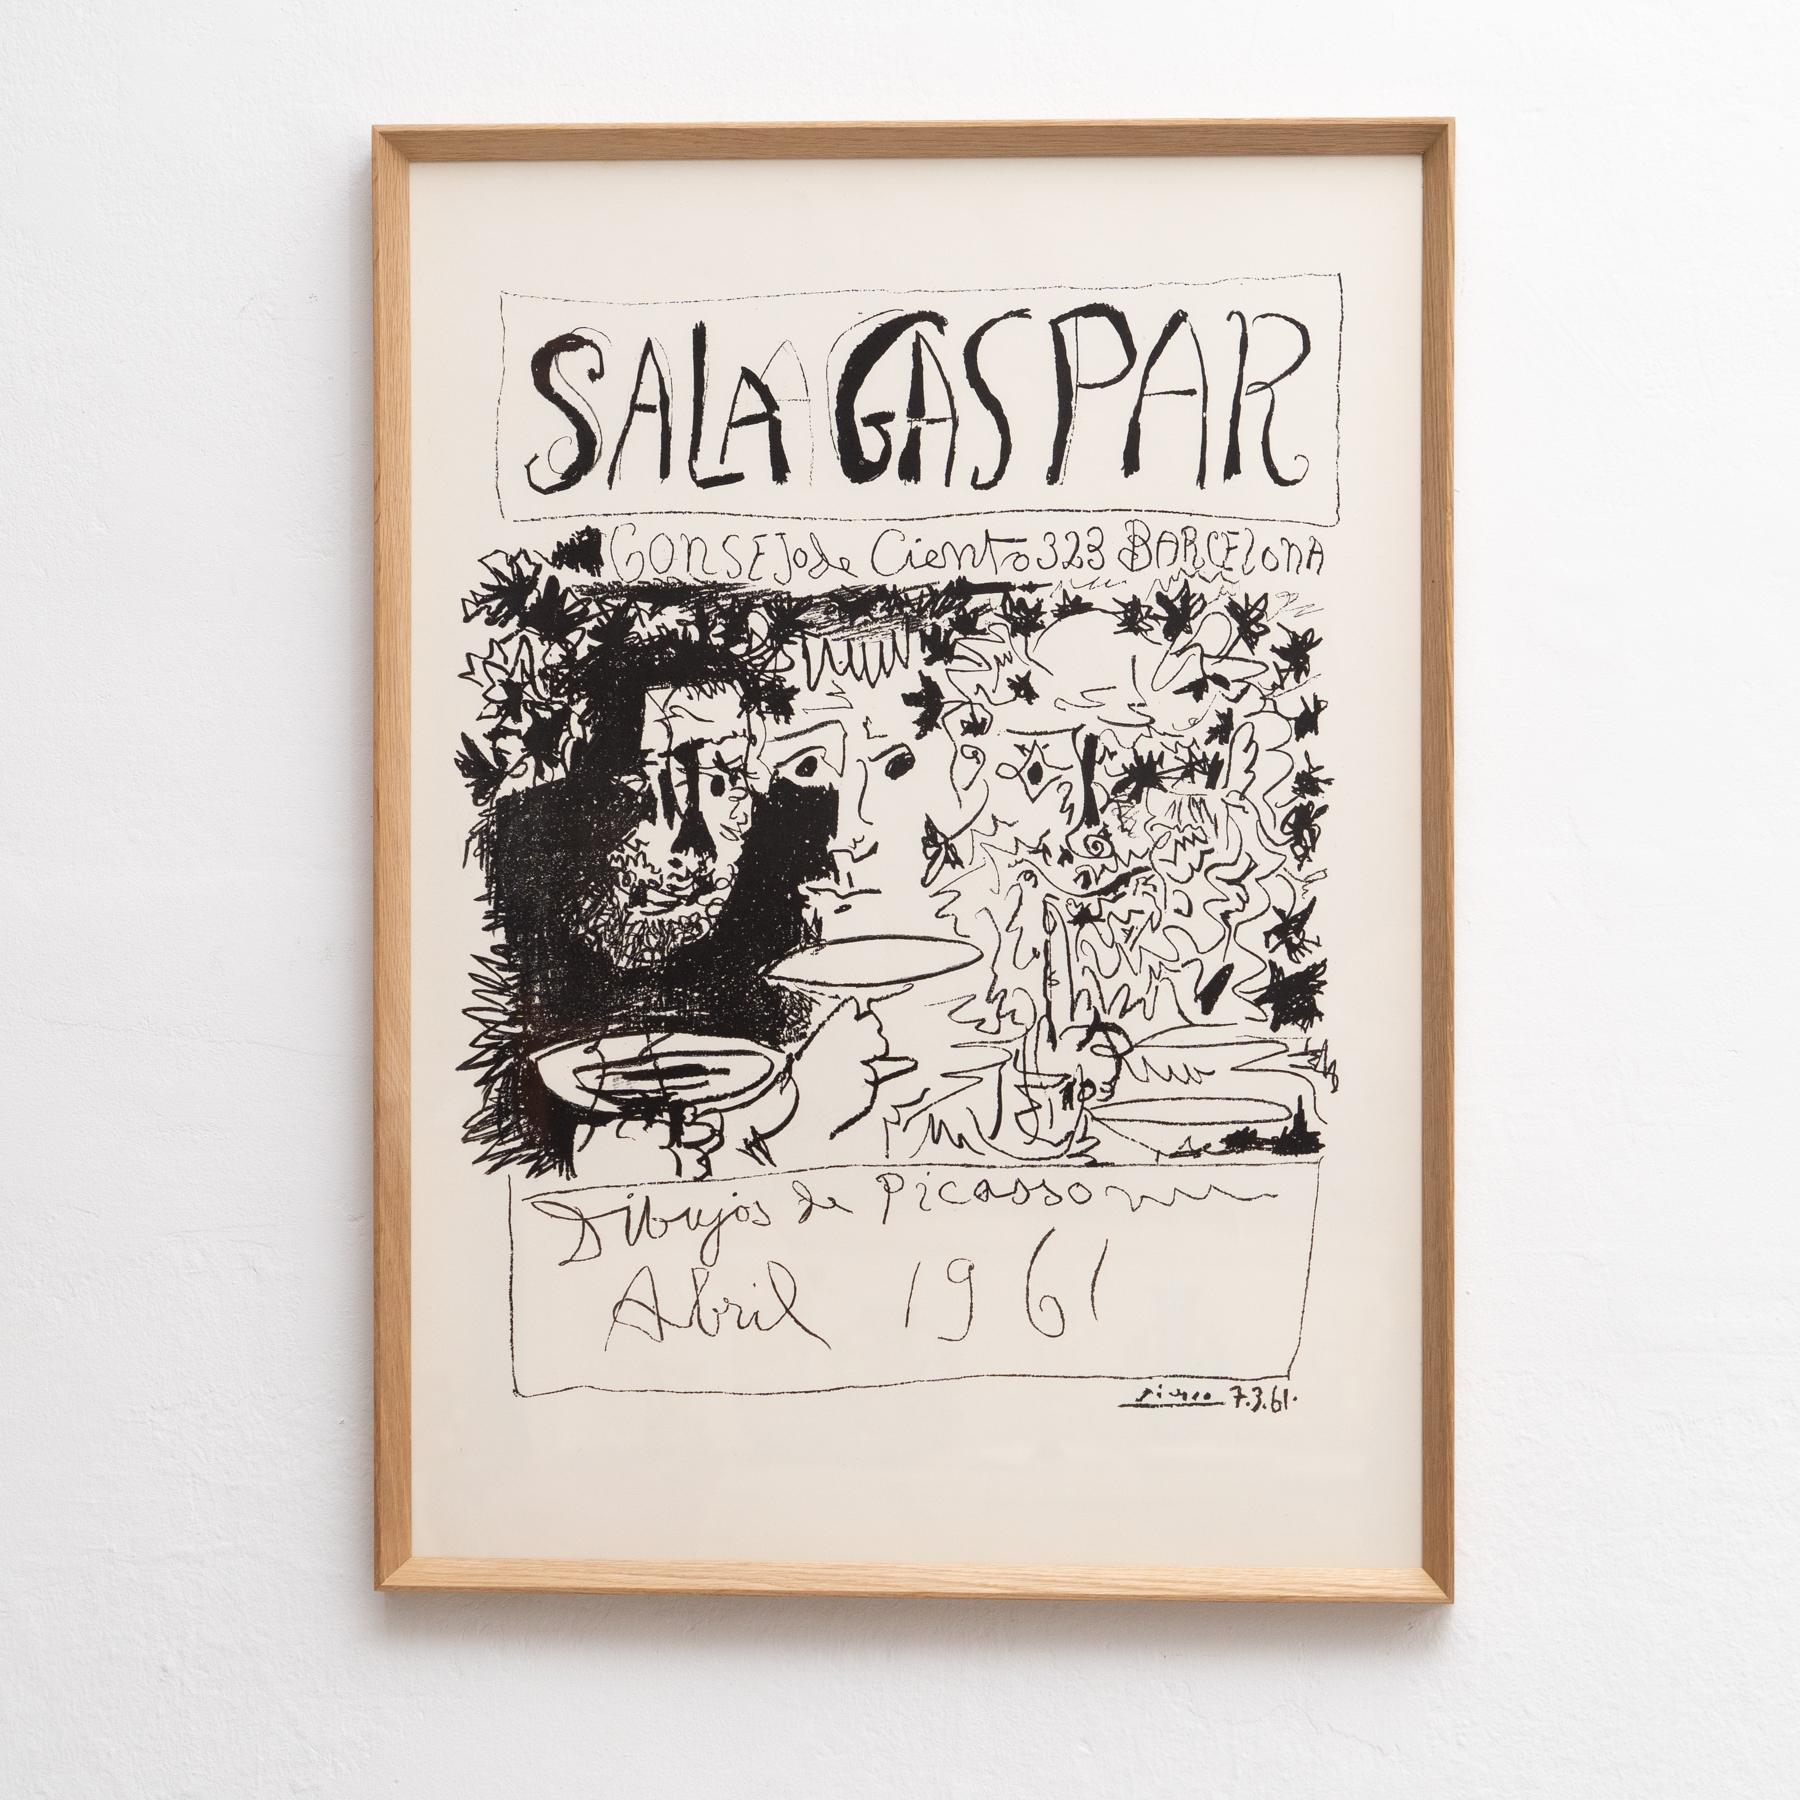 Mid-Century Modern Historical Lithographic Framed Poster of Drawings by Picasso, circa 1961 For Sale